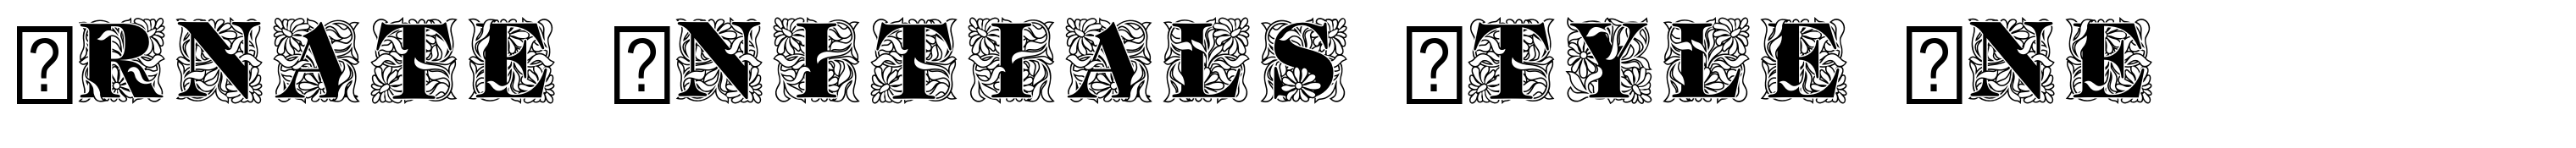 Ornate Initials Style One